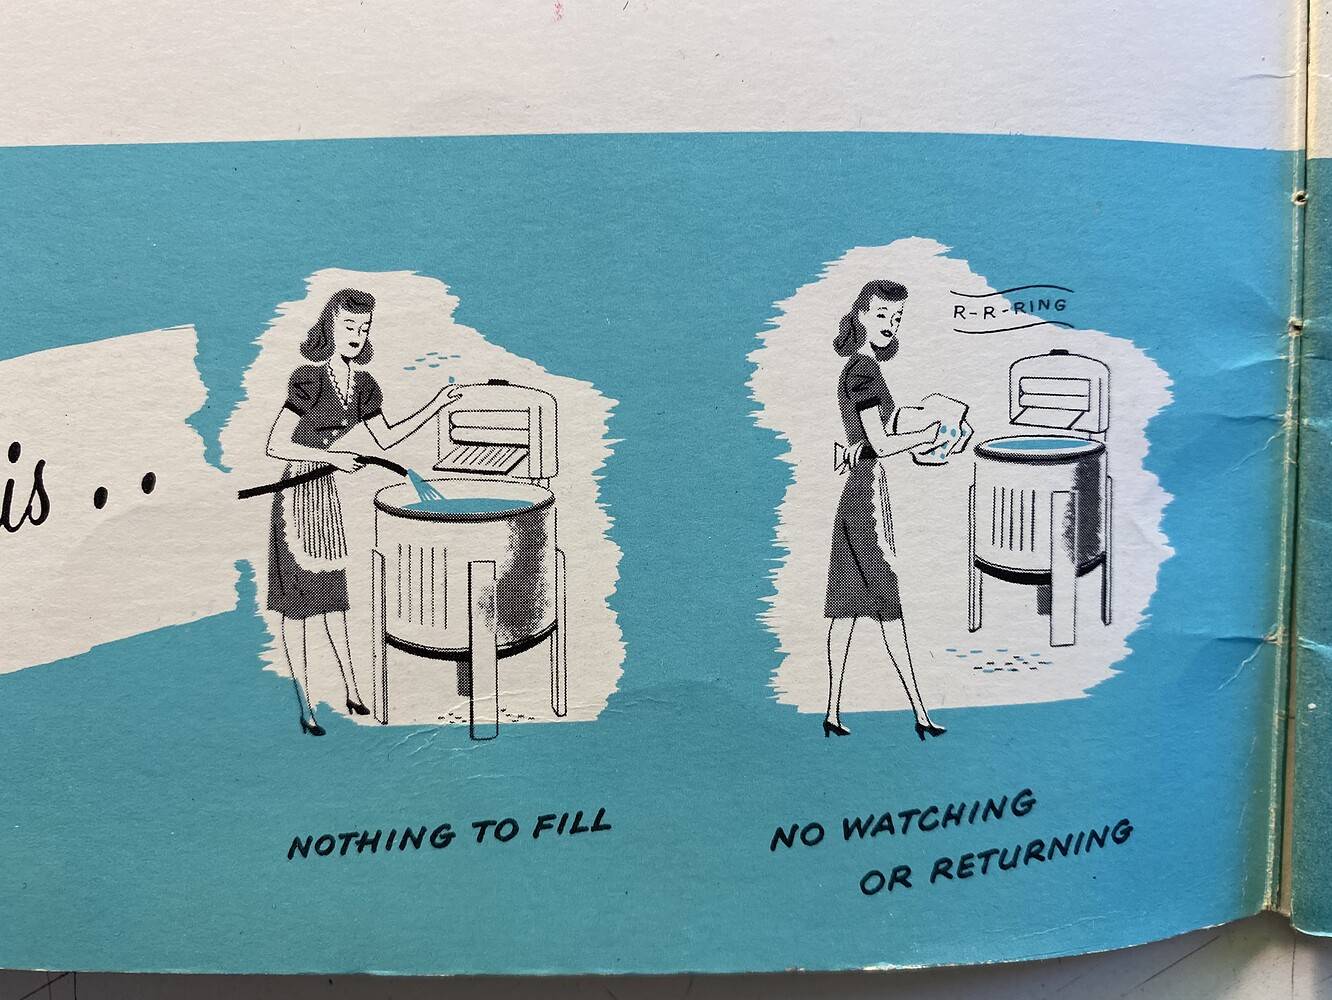 Spot illustrations from a Mid-Century washing machine brochure. Features two images of the same woman filling up the basin of the washing machine and preparing clothing to put in it. She is wearing a short sleeved dress and apron. The illustrations are black and white with blue accents for the water.